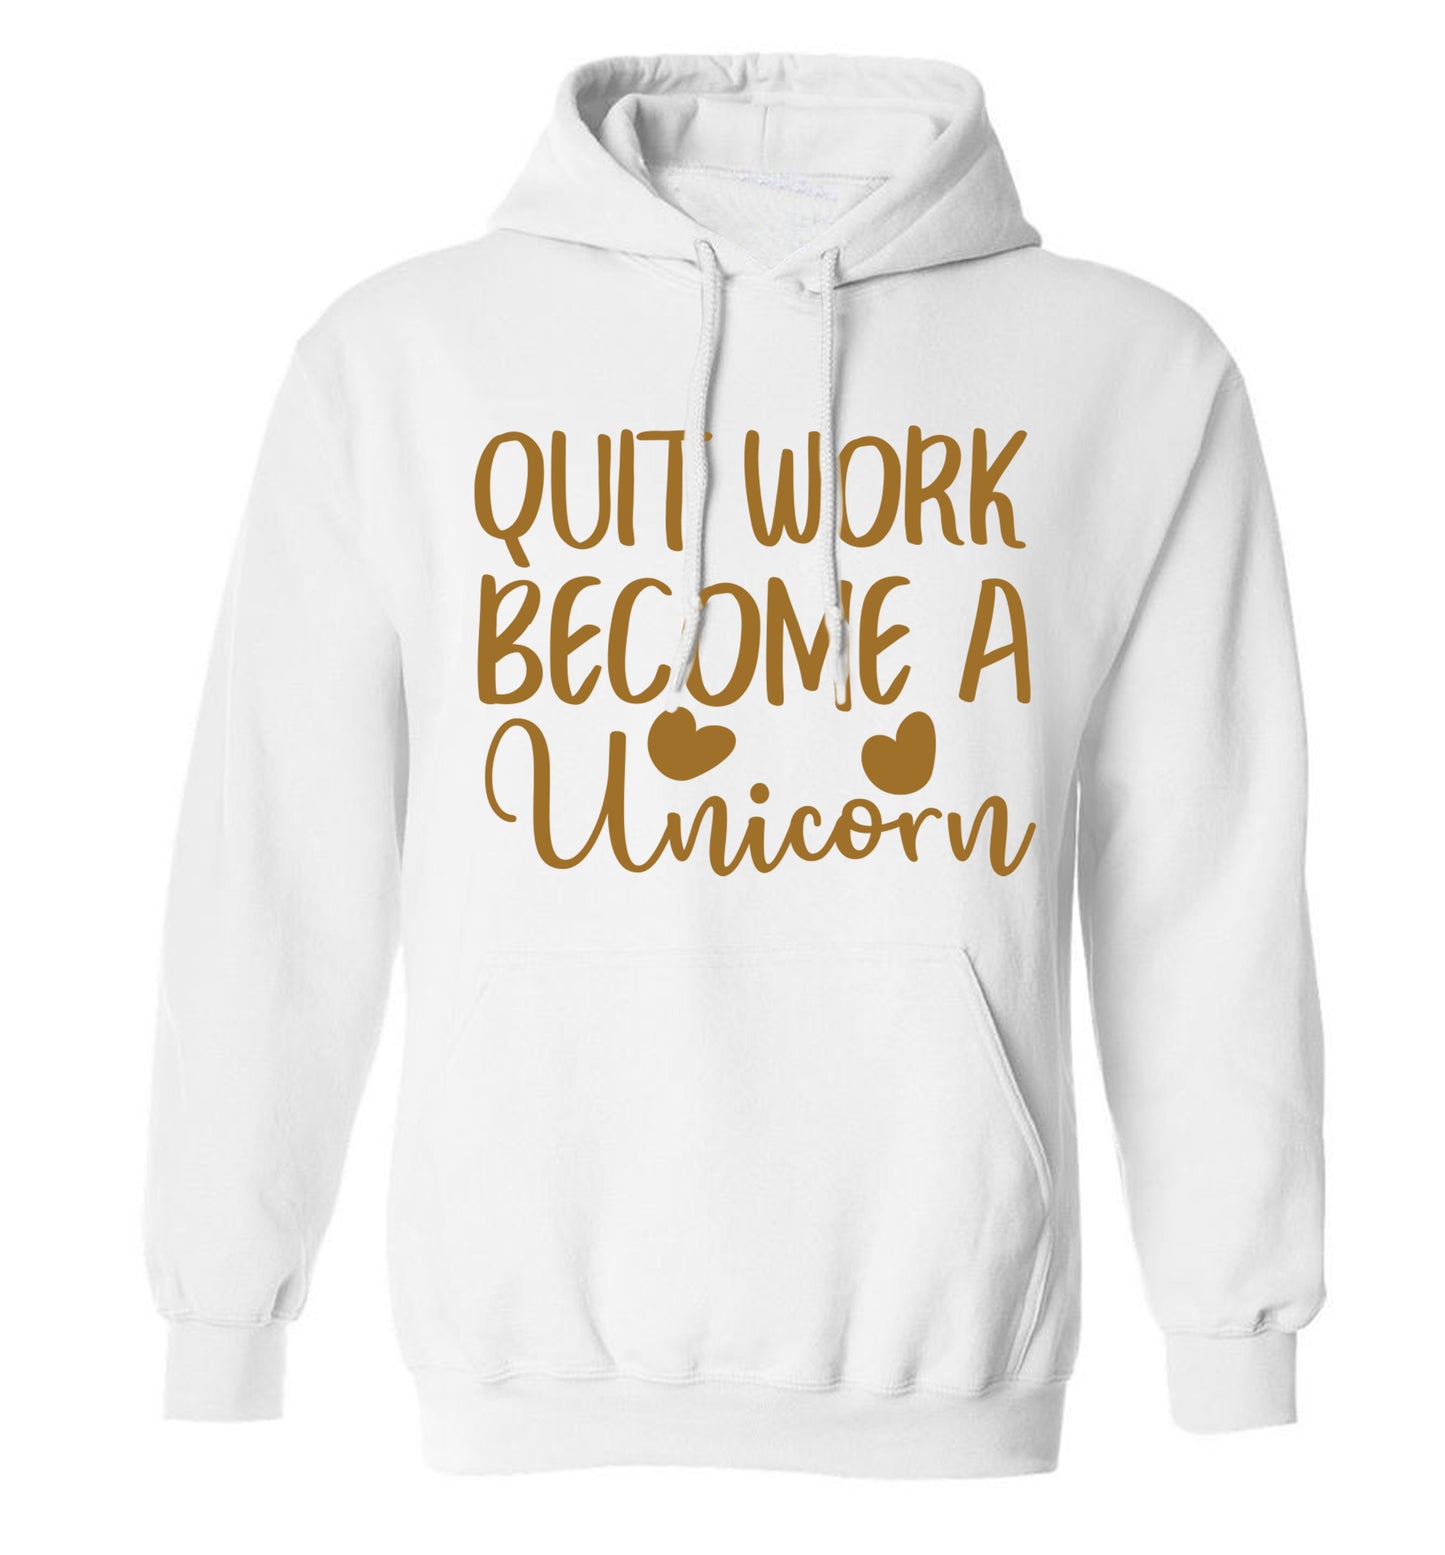 Quit work become a unicorn adults unisex white hoodie 2XL